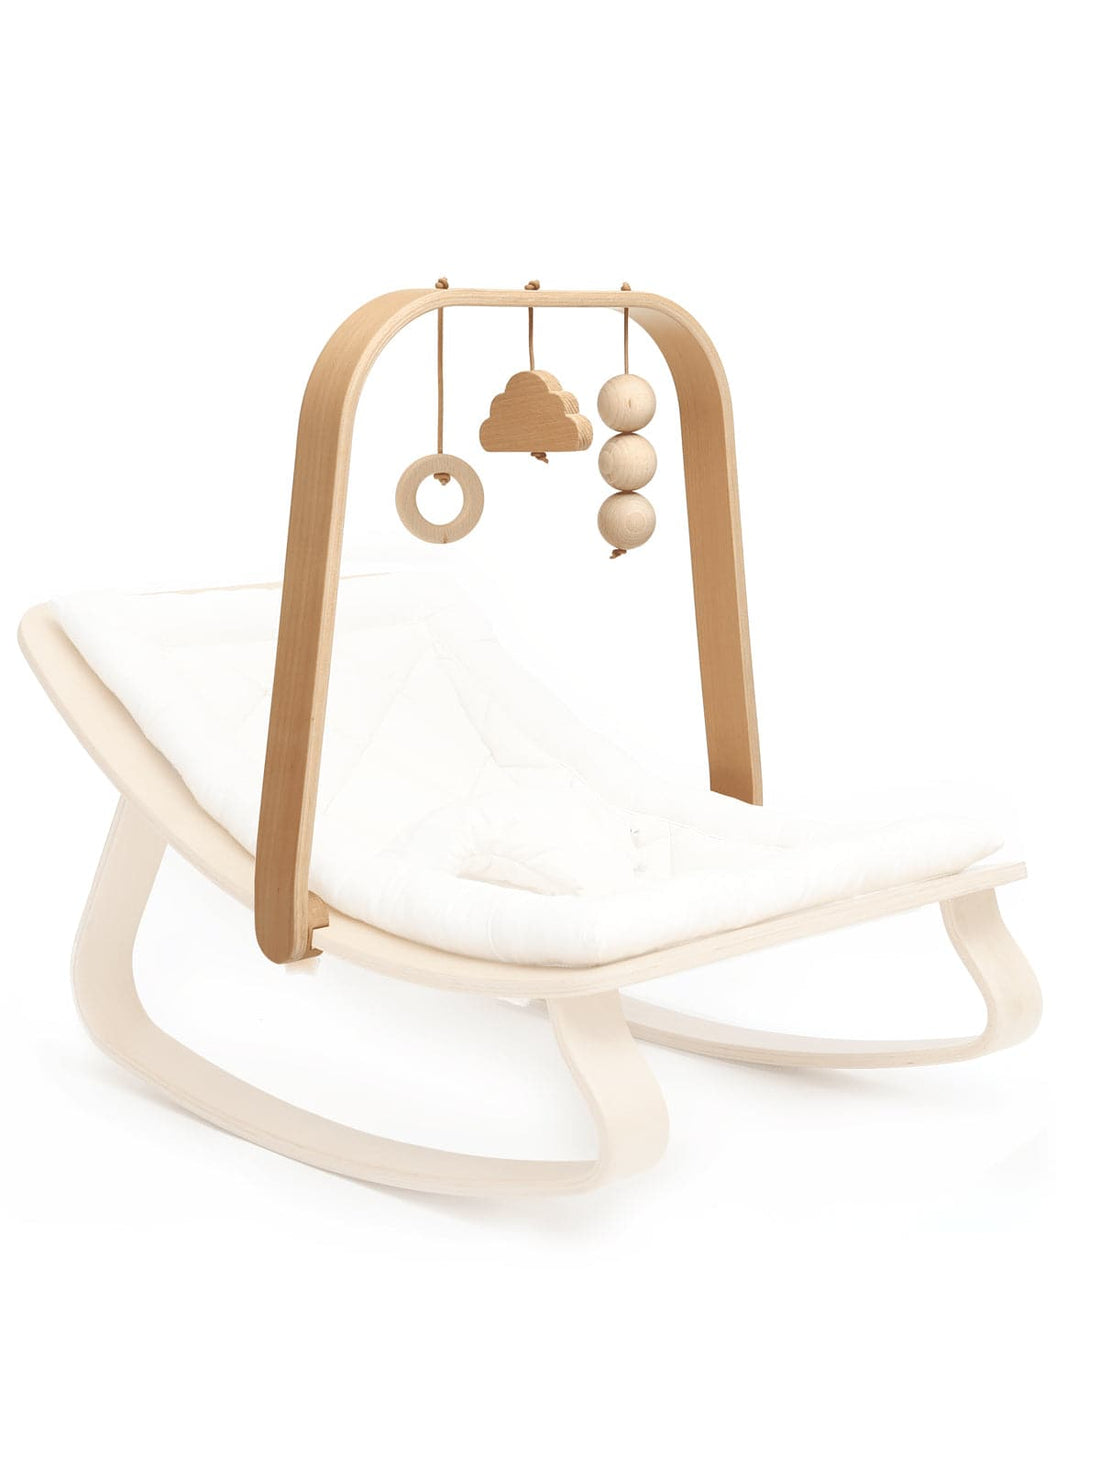 LEVO ARCH + TOYS (does not include the rocker) SHIPPING END OF NOVEMBER - Norman & Jules